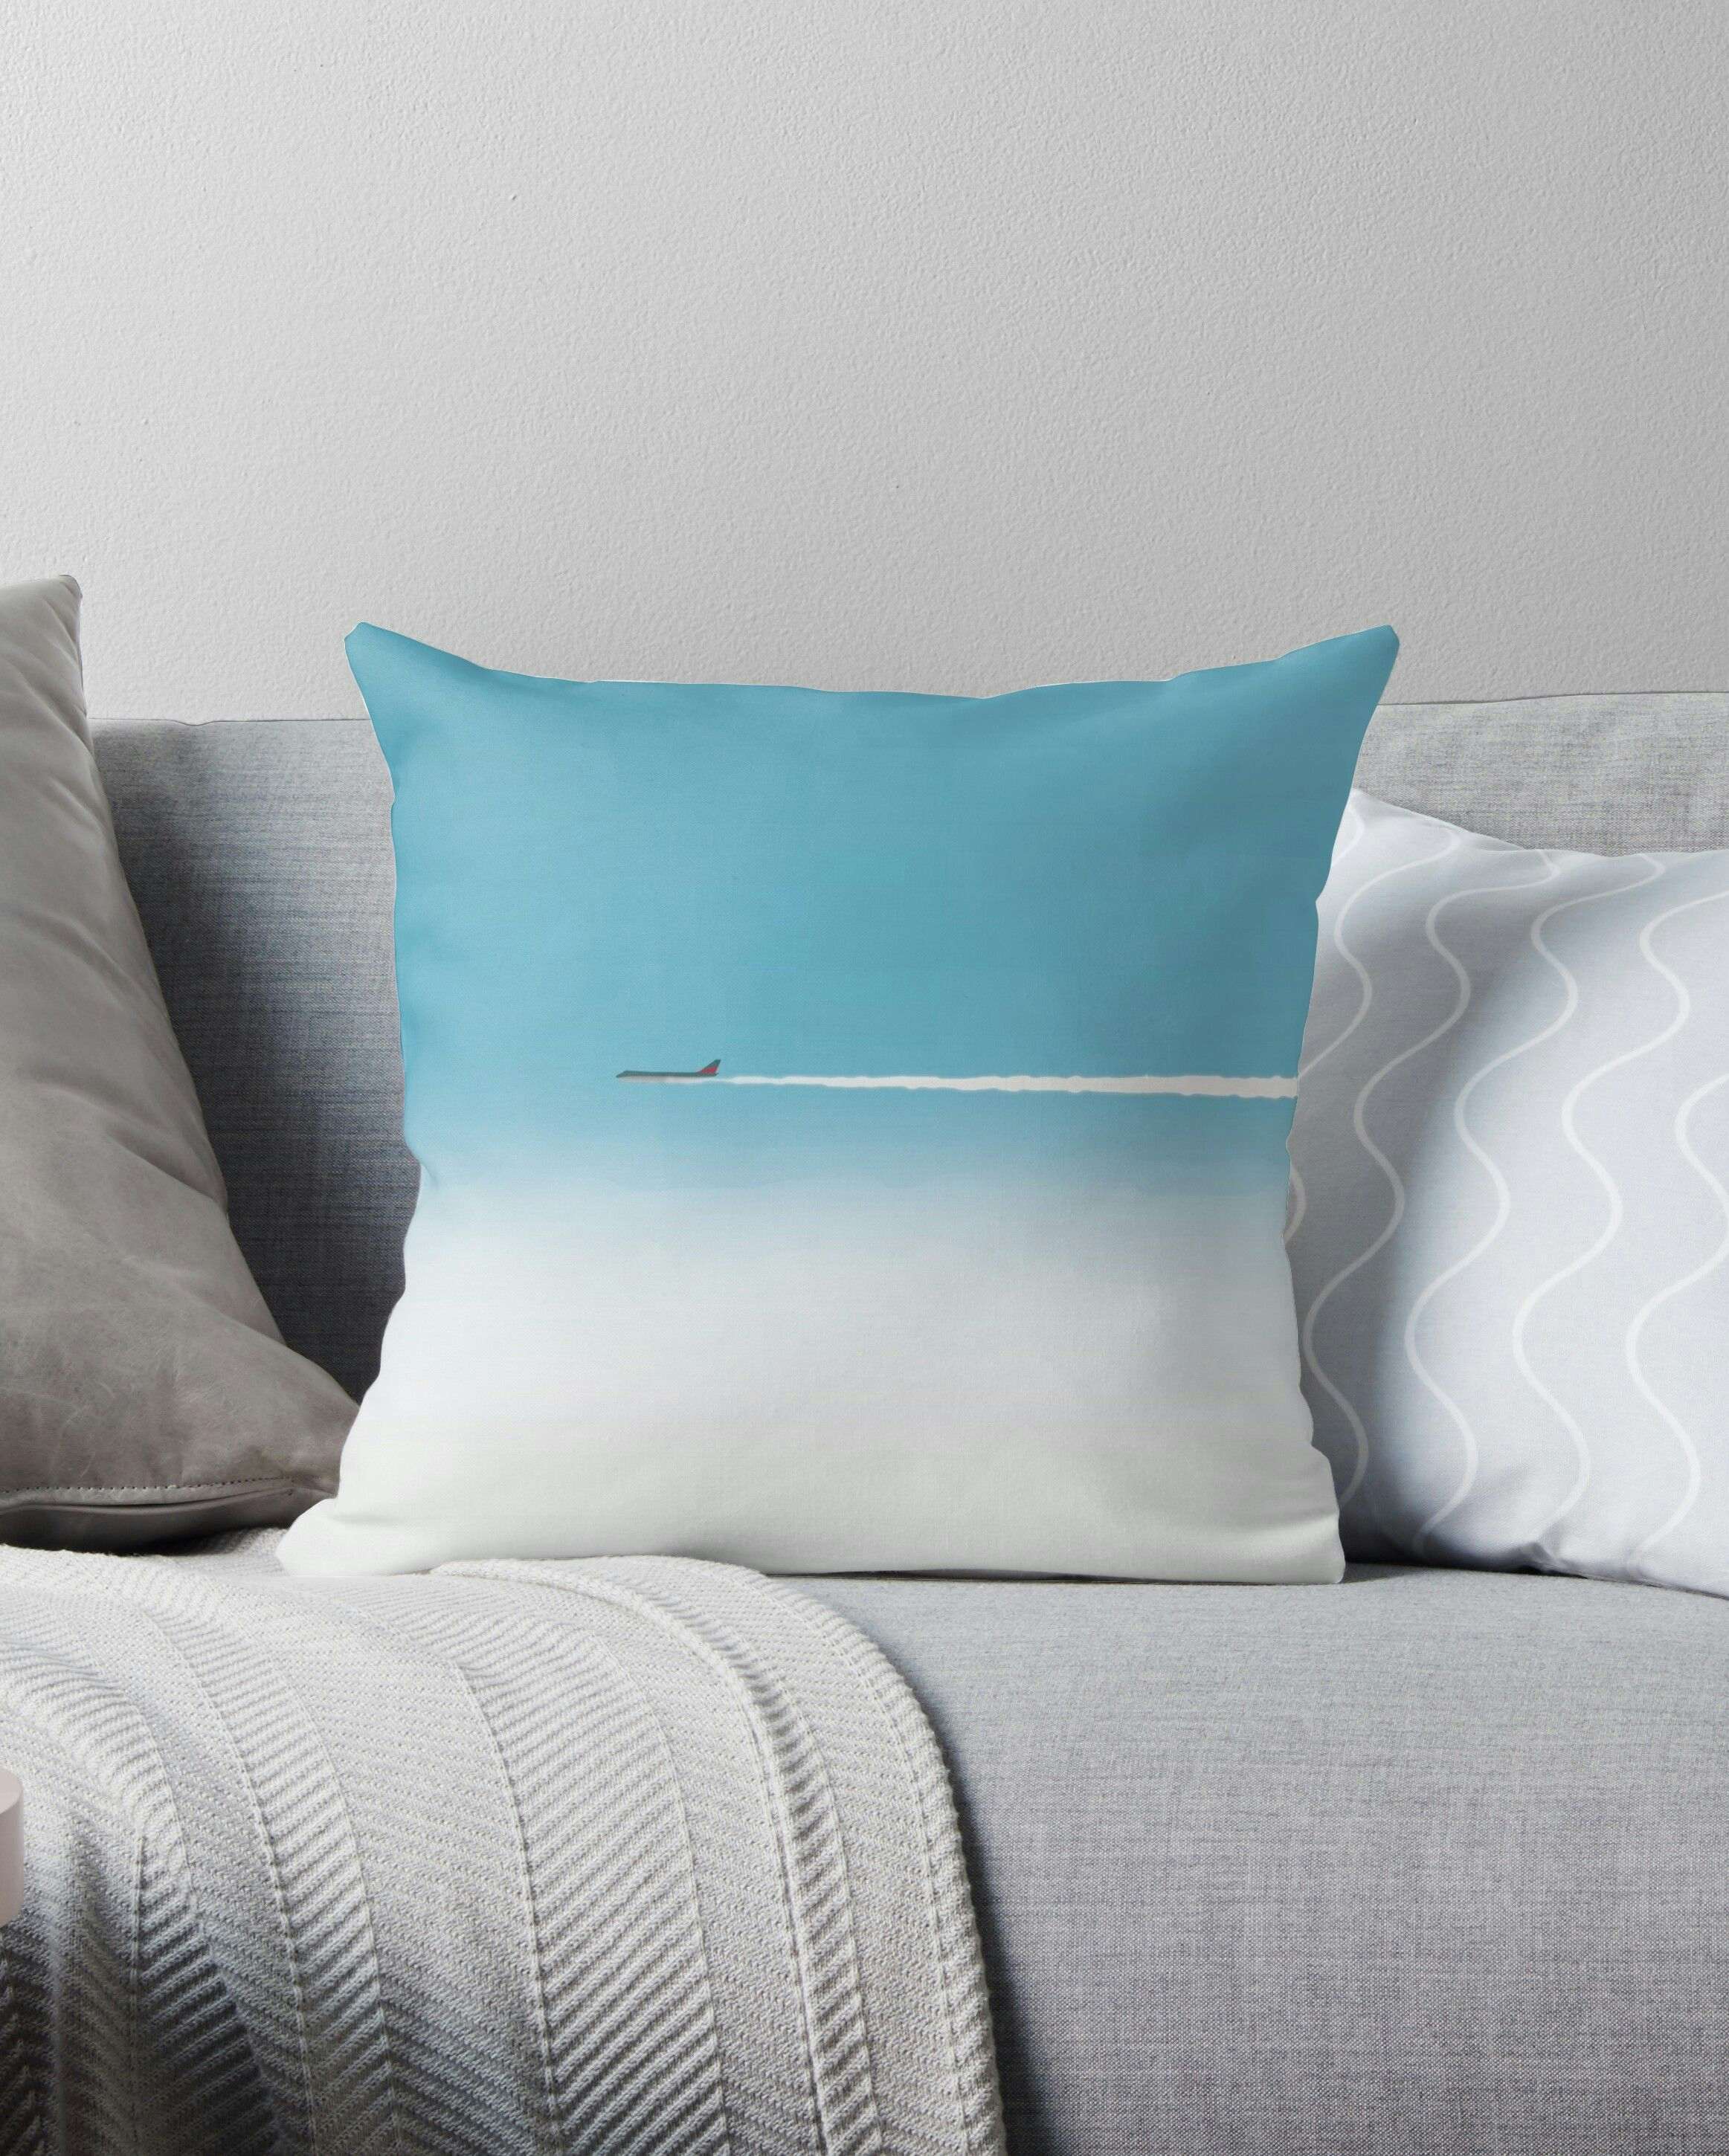 Passing jetliner above a sea of clouds illustration by Xavier Wendling, printed on throw pillow